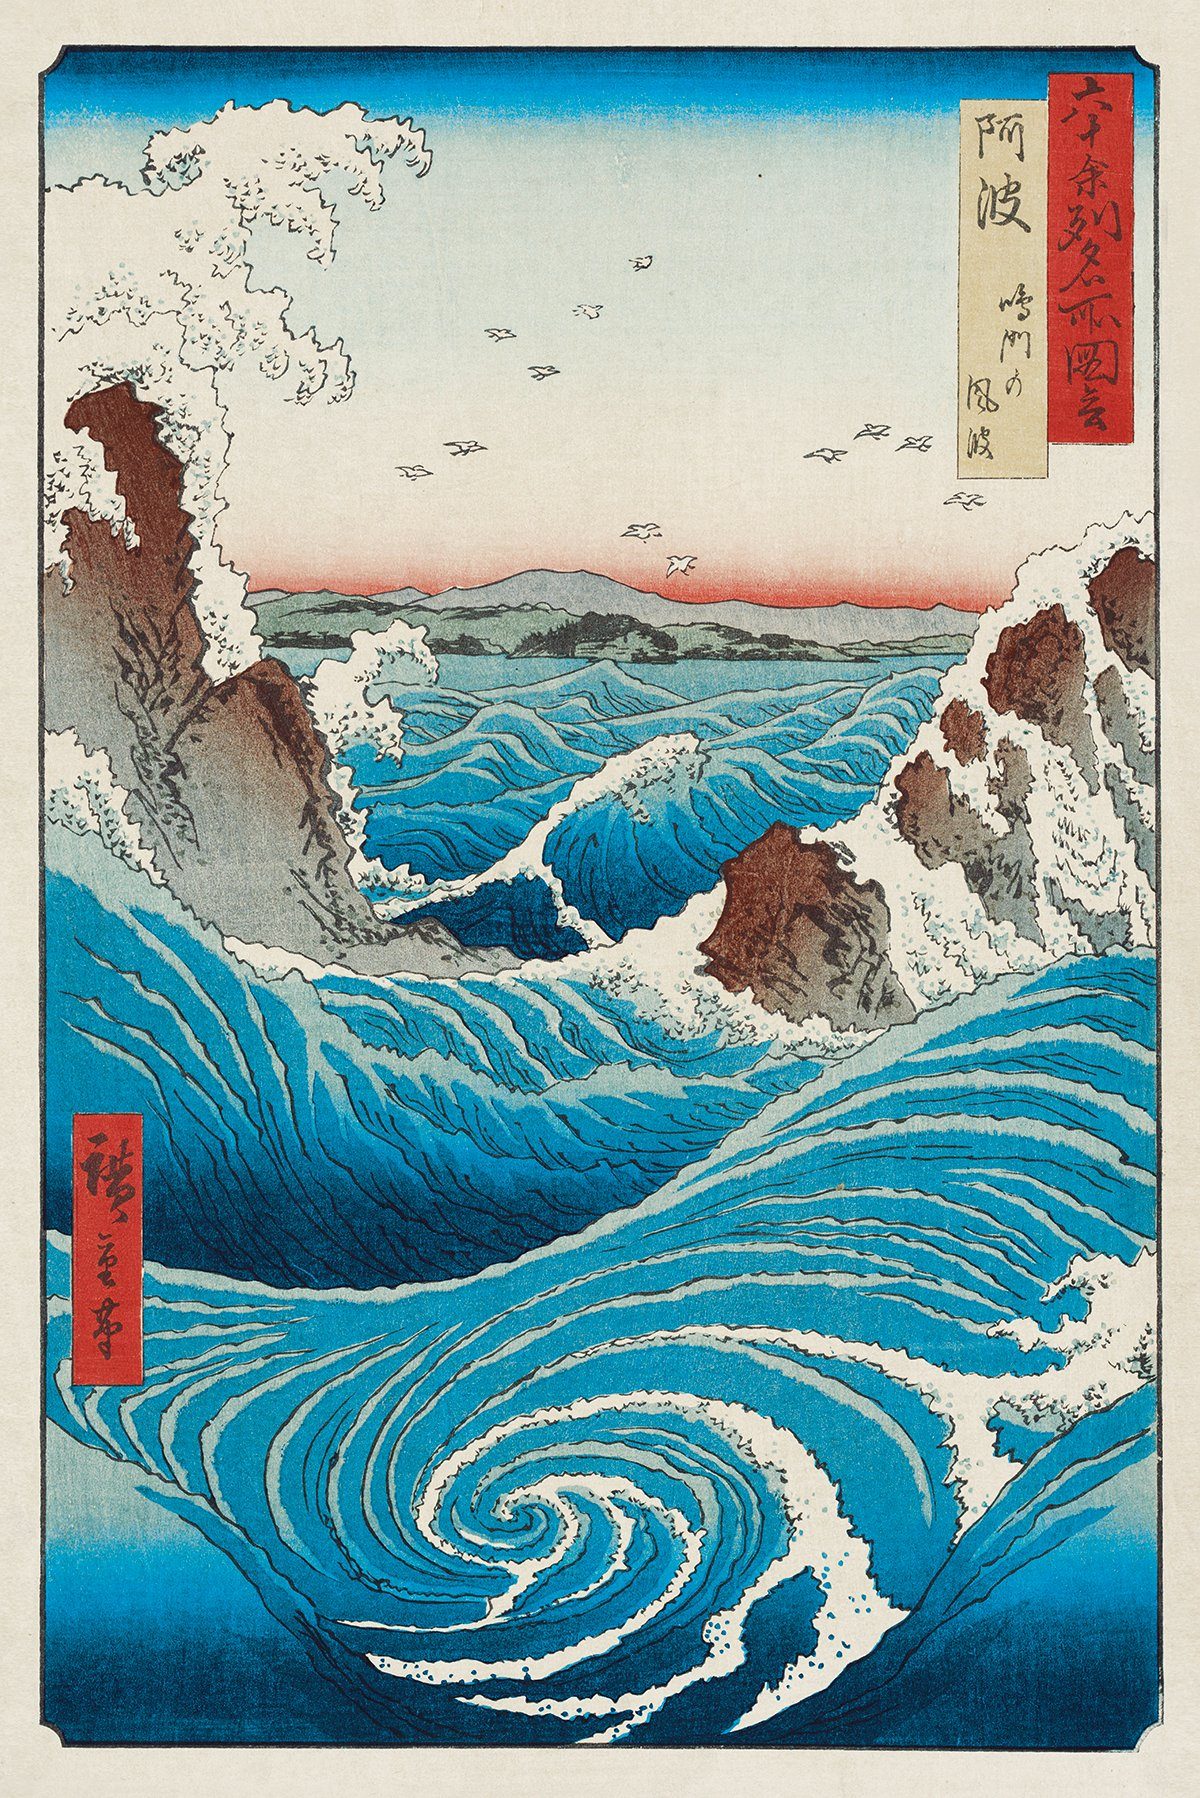 Close Up Poster Hiroshige Naruto Whirlpool Poster 61 x 91,5 cm